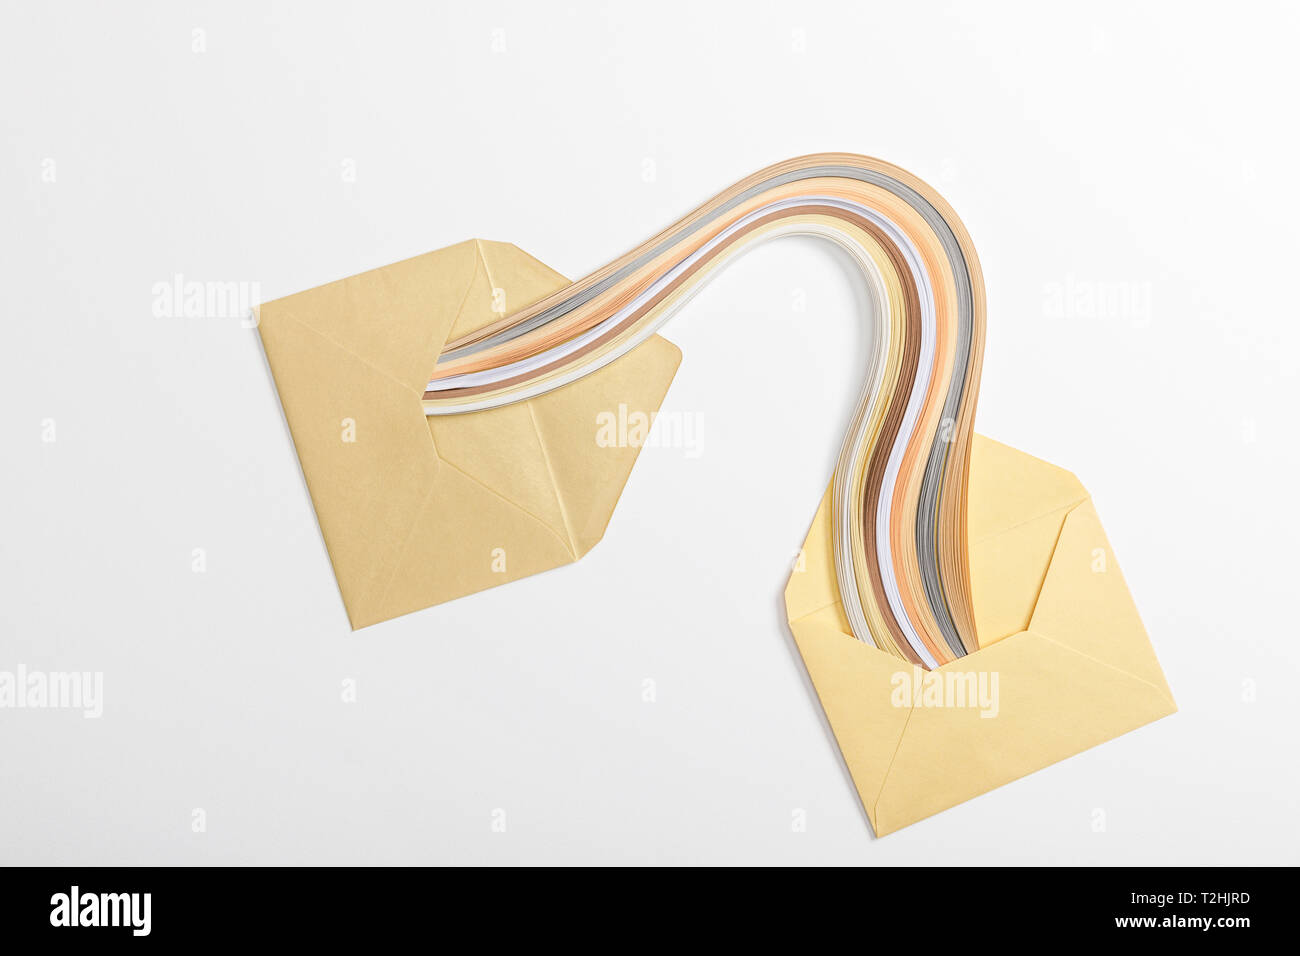 Download Top View Of Yellow Envelopes With Multicolored Rainbow On Grey Background Stock Photo Alamy Yellowimages Mockups